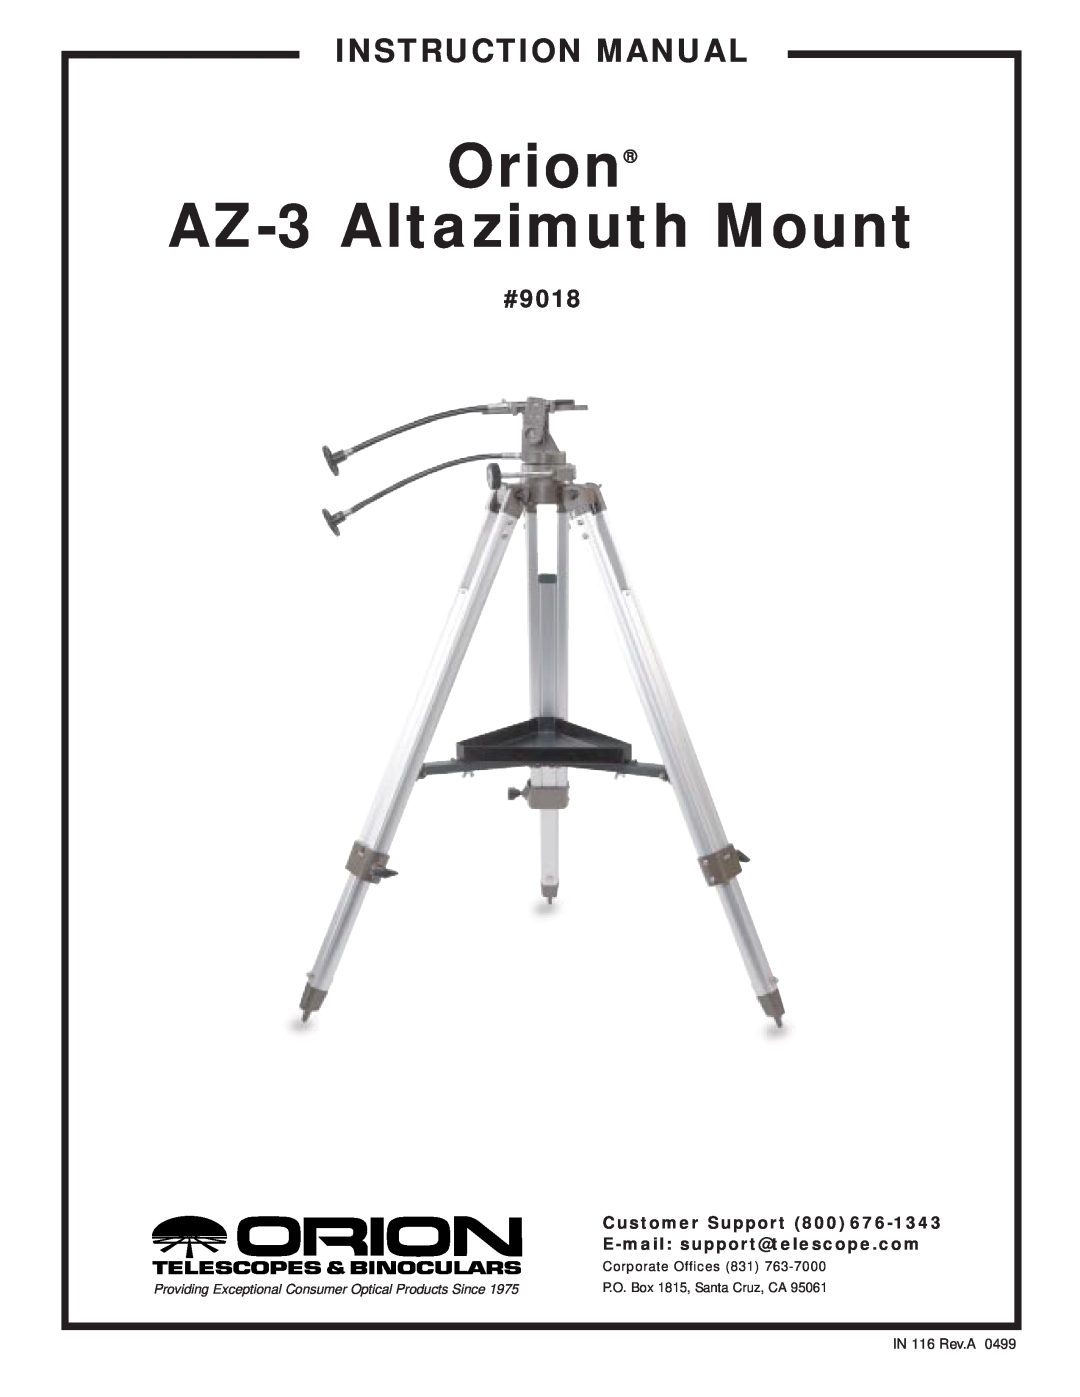 Orion instruction manual Customer Support, E-mail support@telescope.com, Orion, AZ-3 Altazimuth Mount, #9018 